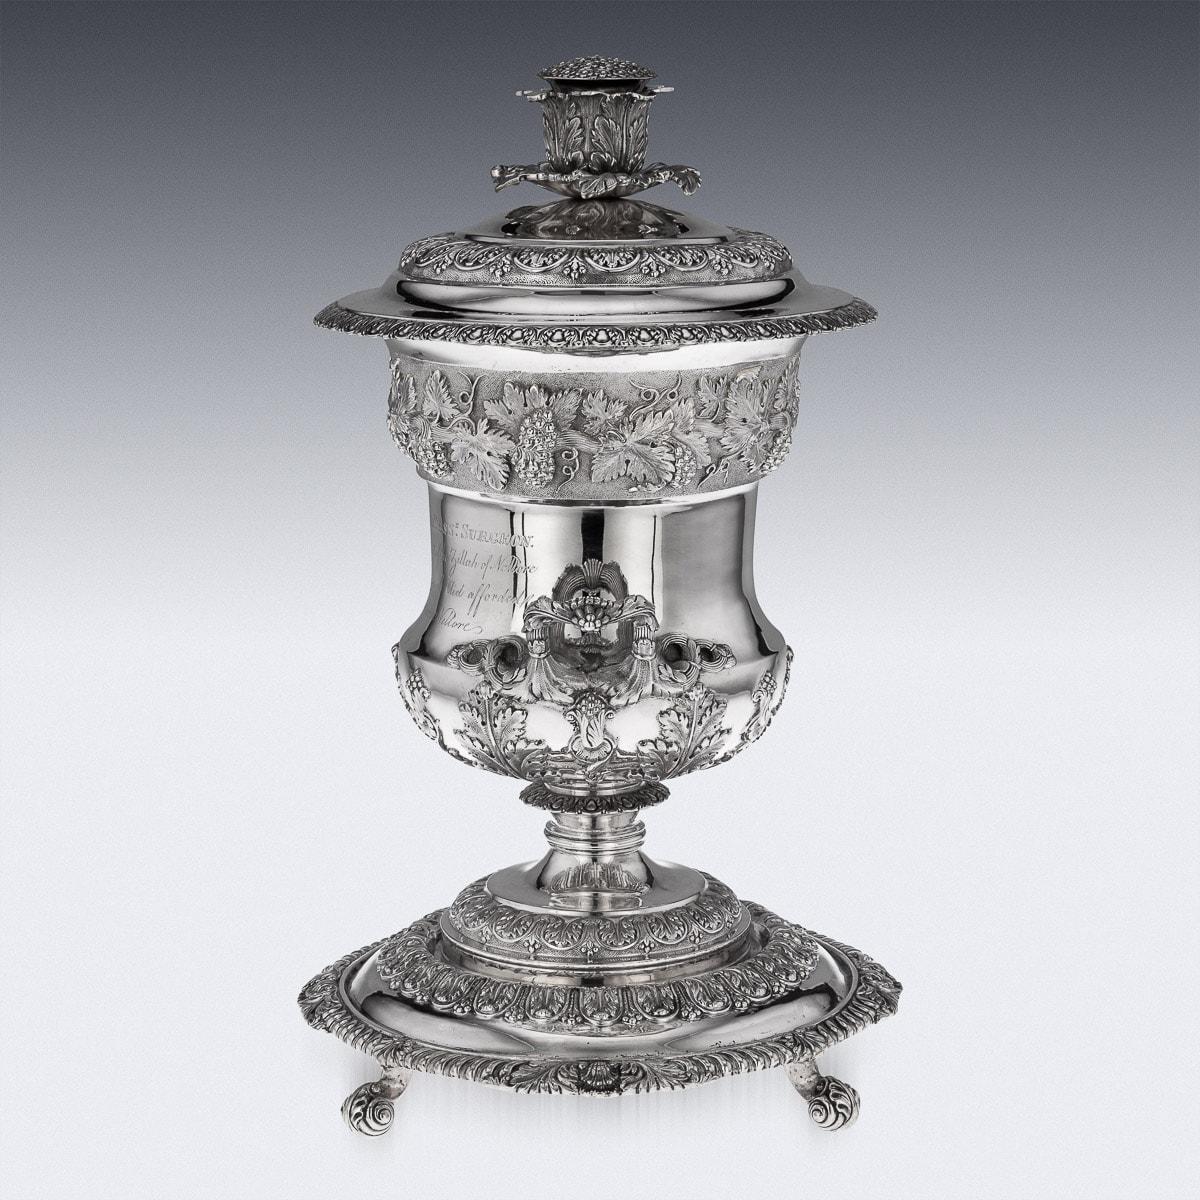 Antique 19th century Indian Colonial solid silver cup and cover on stand, exceptionally heavy and decorative, campana form on a spreading foot, domed lid chased and embossed with foliage and topped with a cast spray of flowers, rim with applied